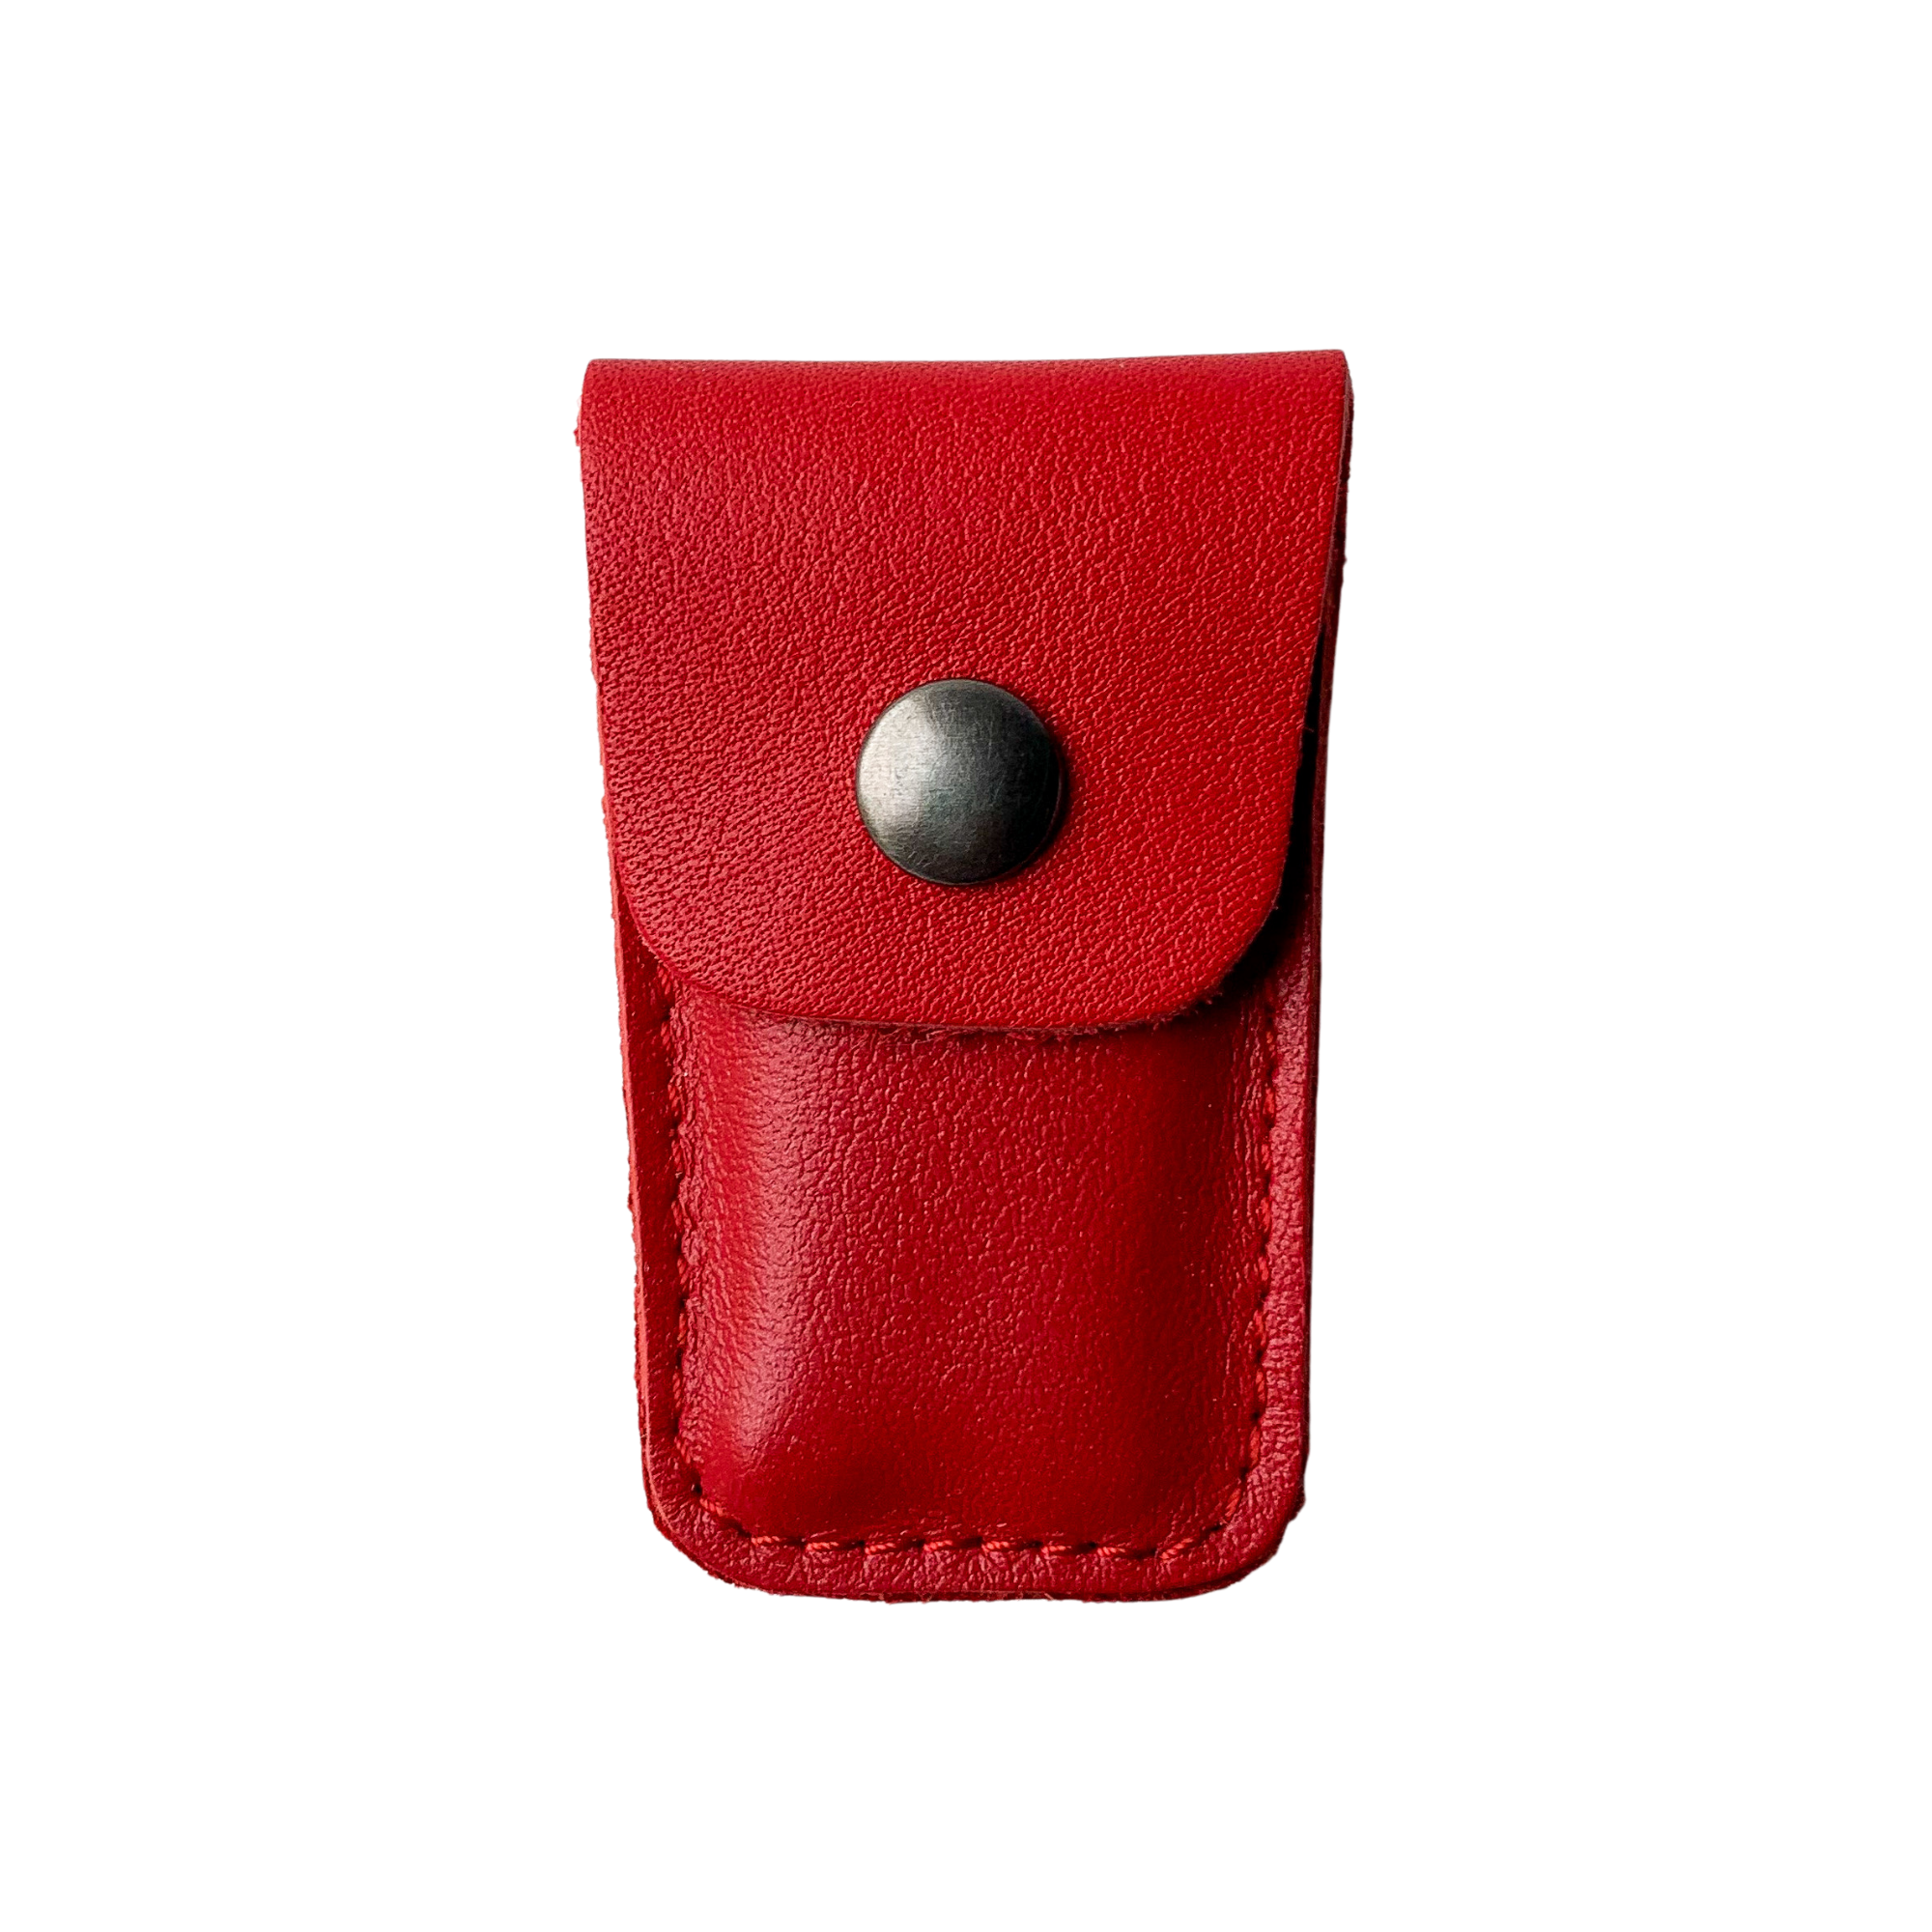 Nogent Folding scissors Red leather case Made in France Clementine Boutique Canada